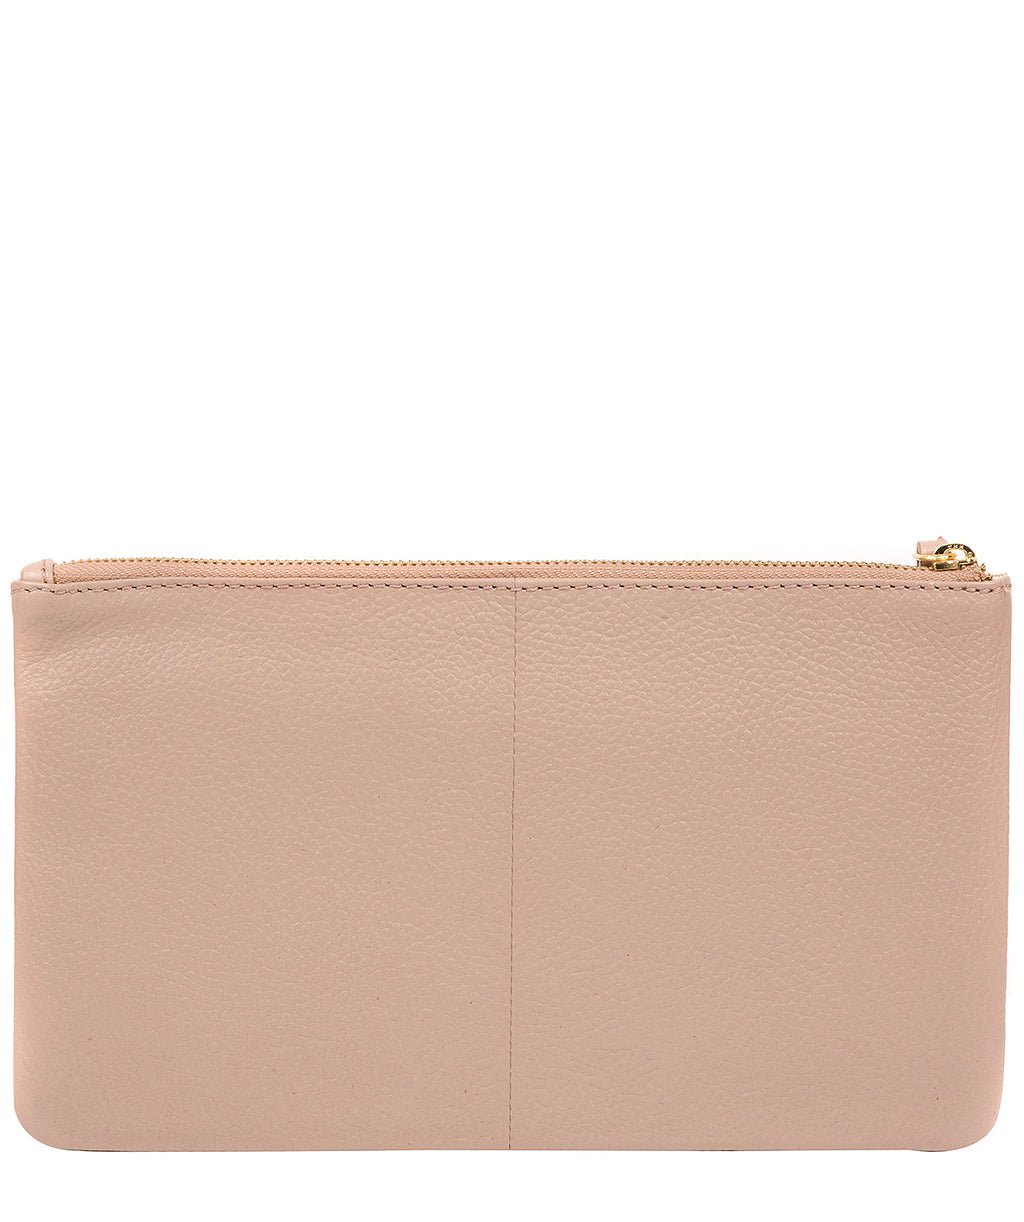 Pink Leather Clutch Bag 'Arlesey' by Pure Luxuries – Pure Luxuries London